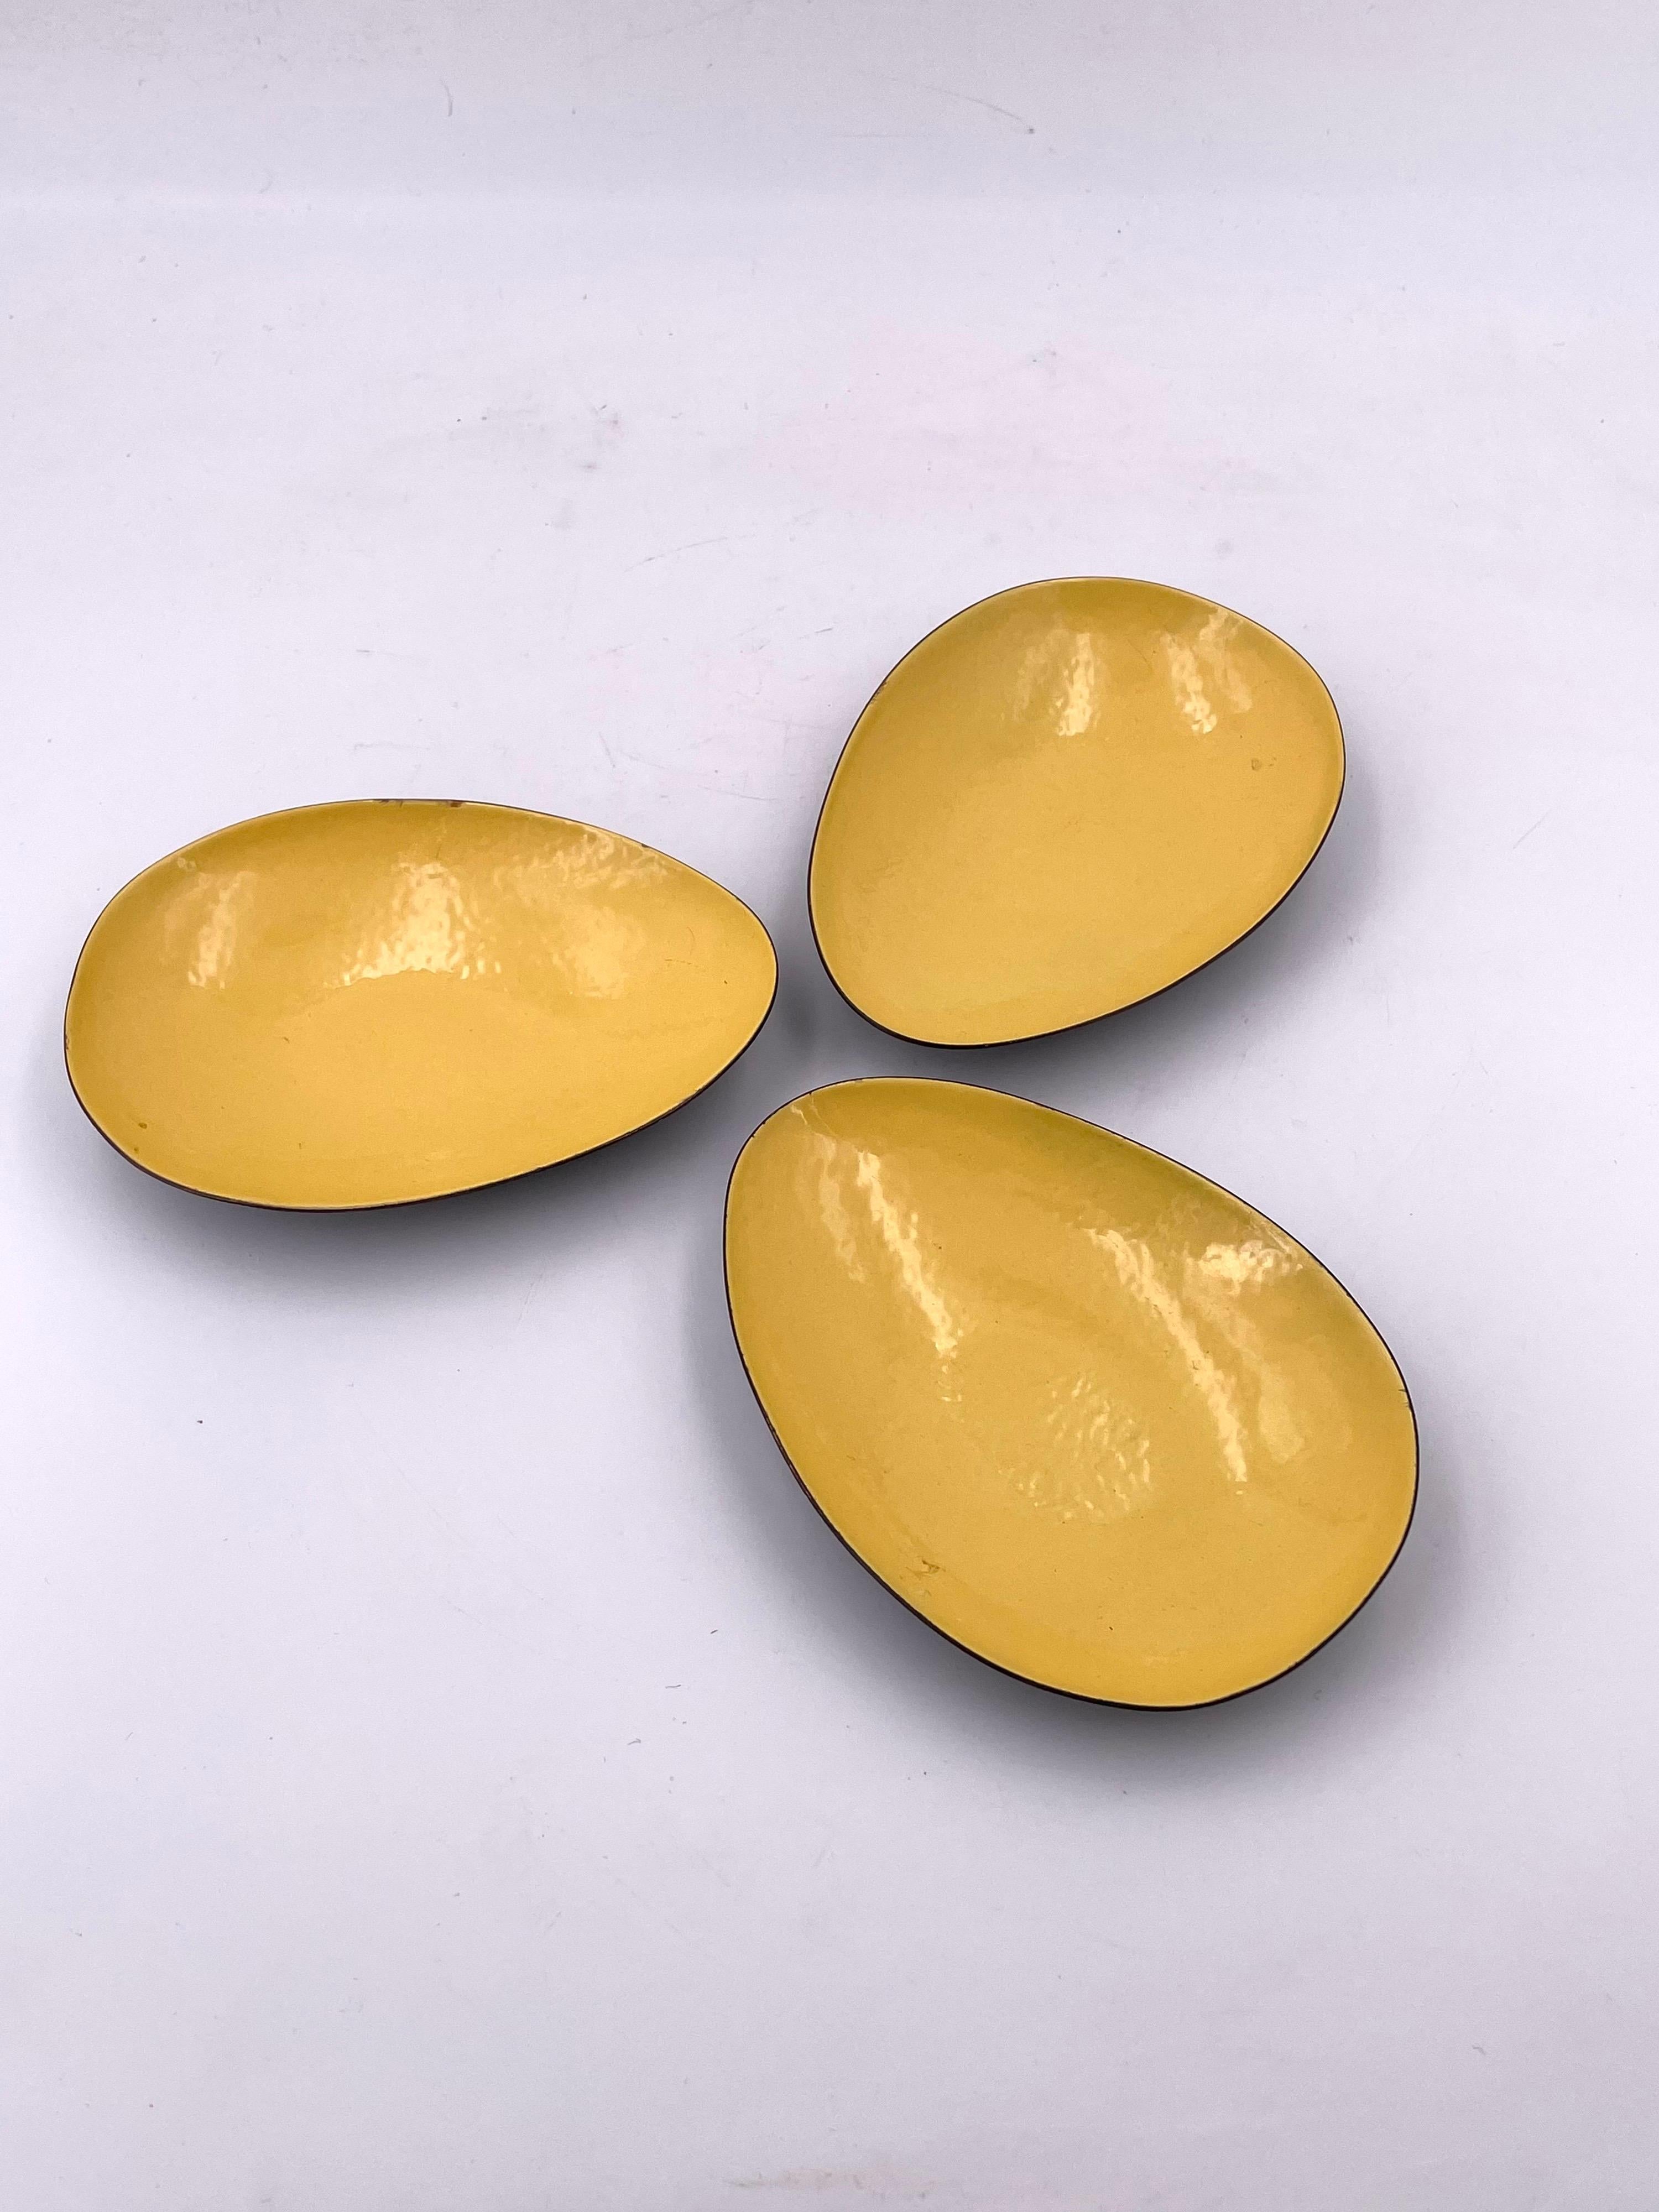 Nice set of 3 enameled on copper in yellow circa 1960s, California design. Egg shape very cool atomic design.